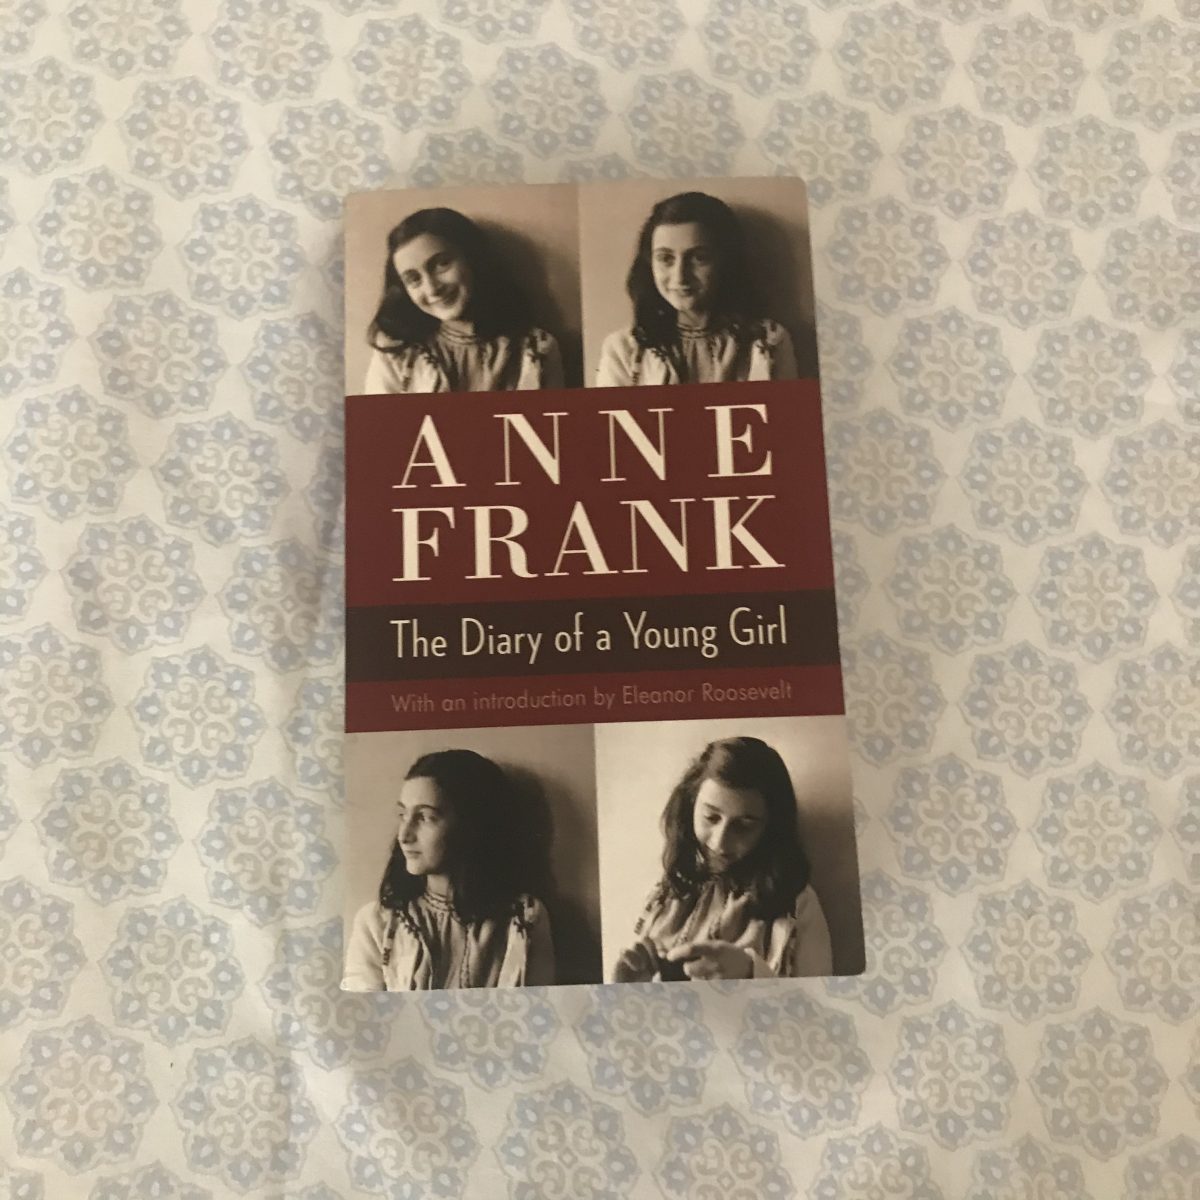 Mint Girl Sees The Diary Of Anne Frank Play